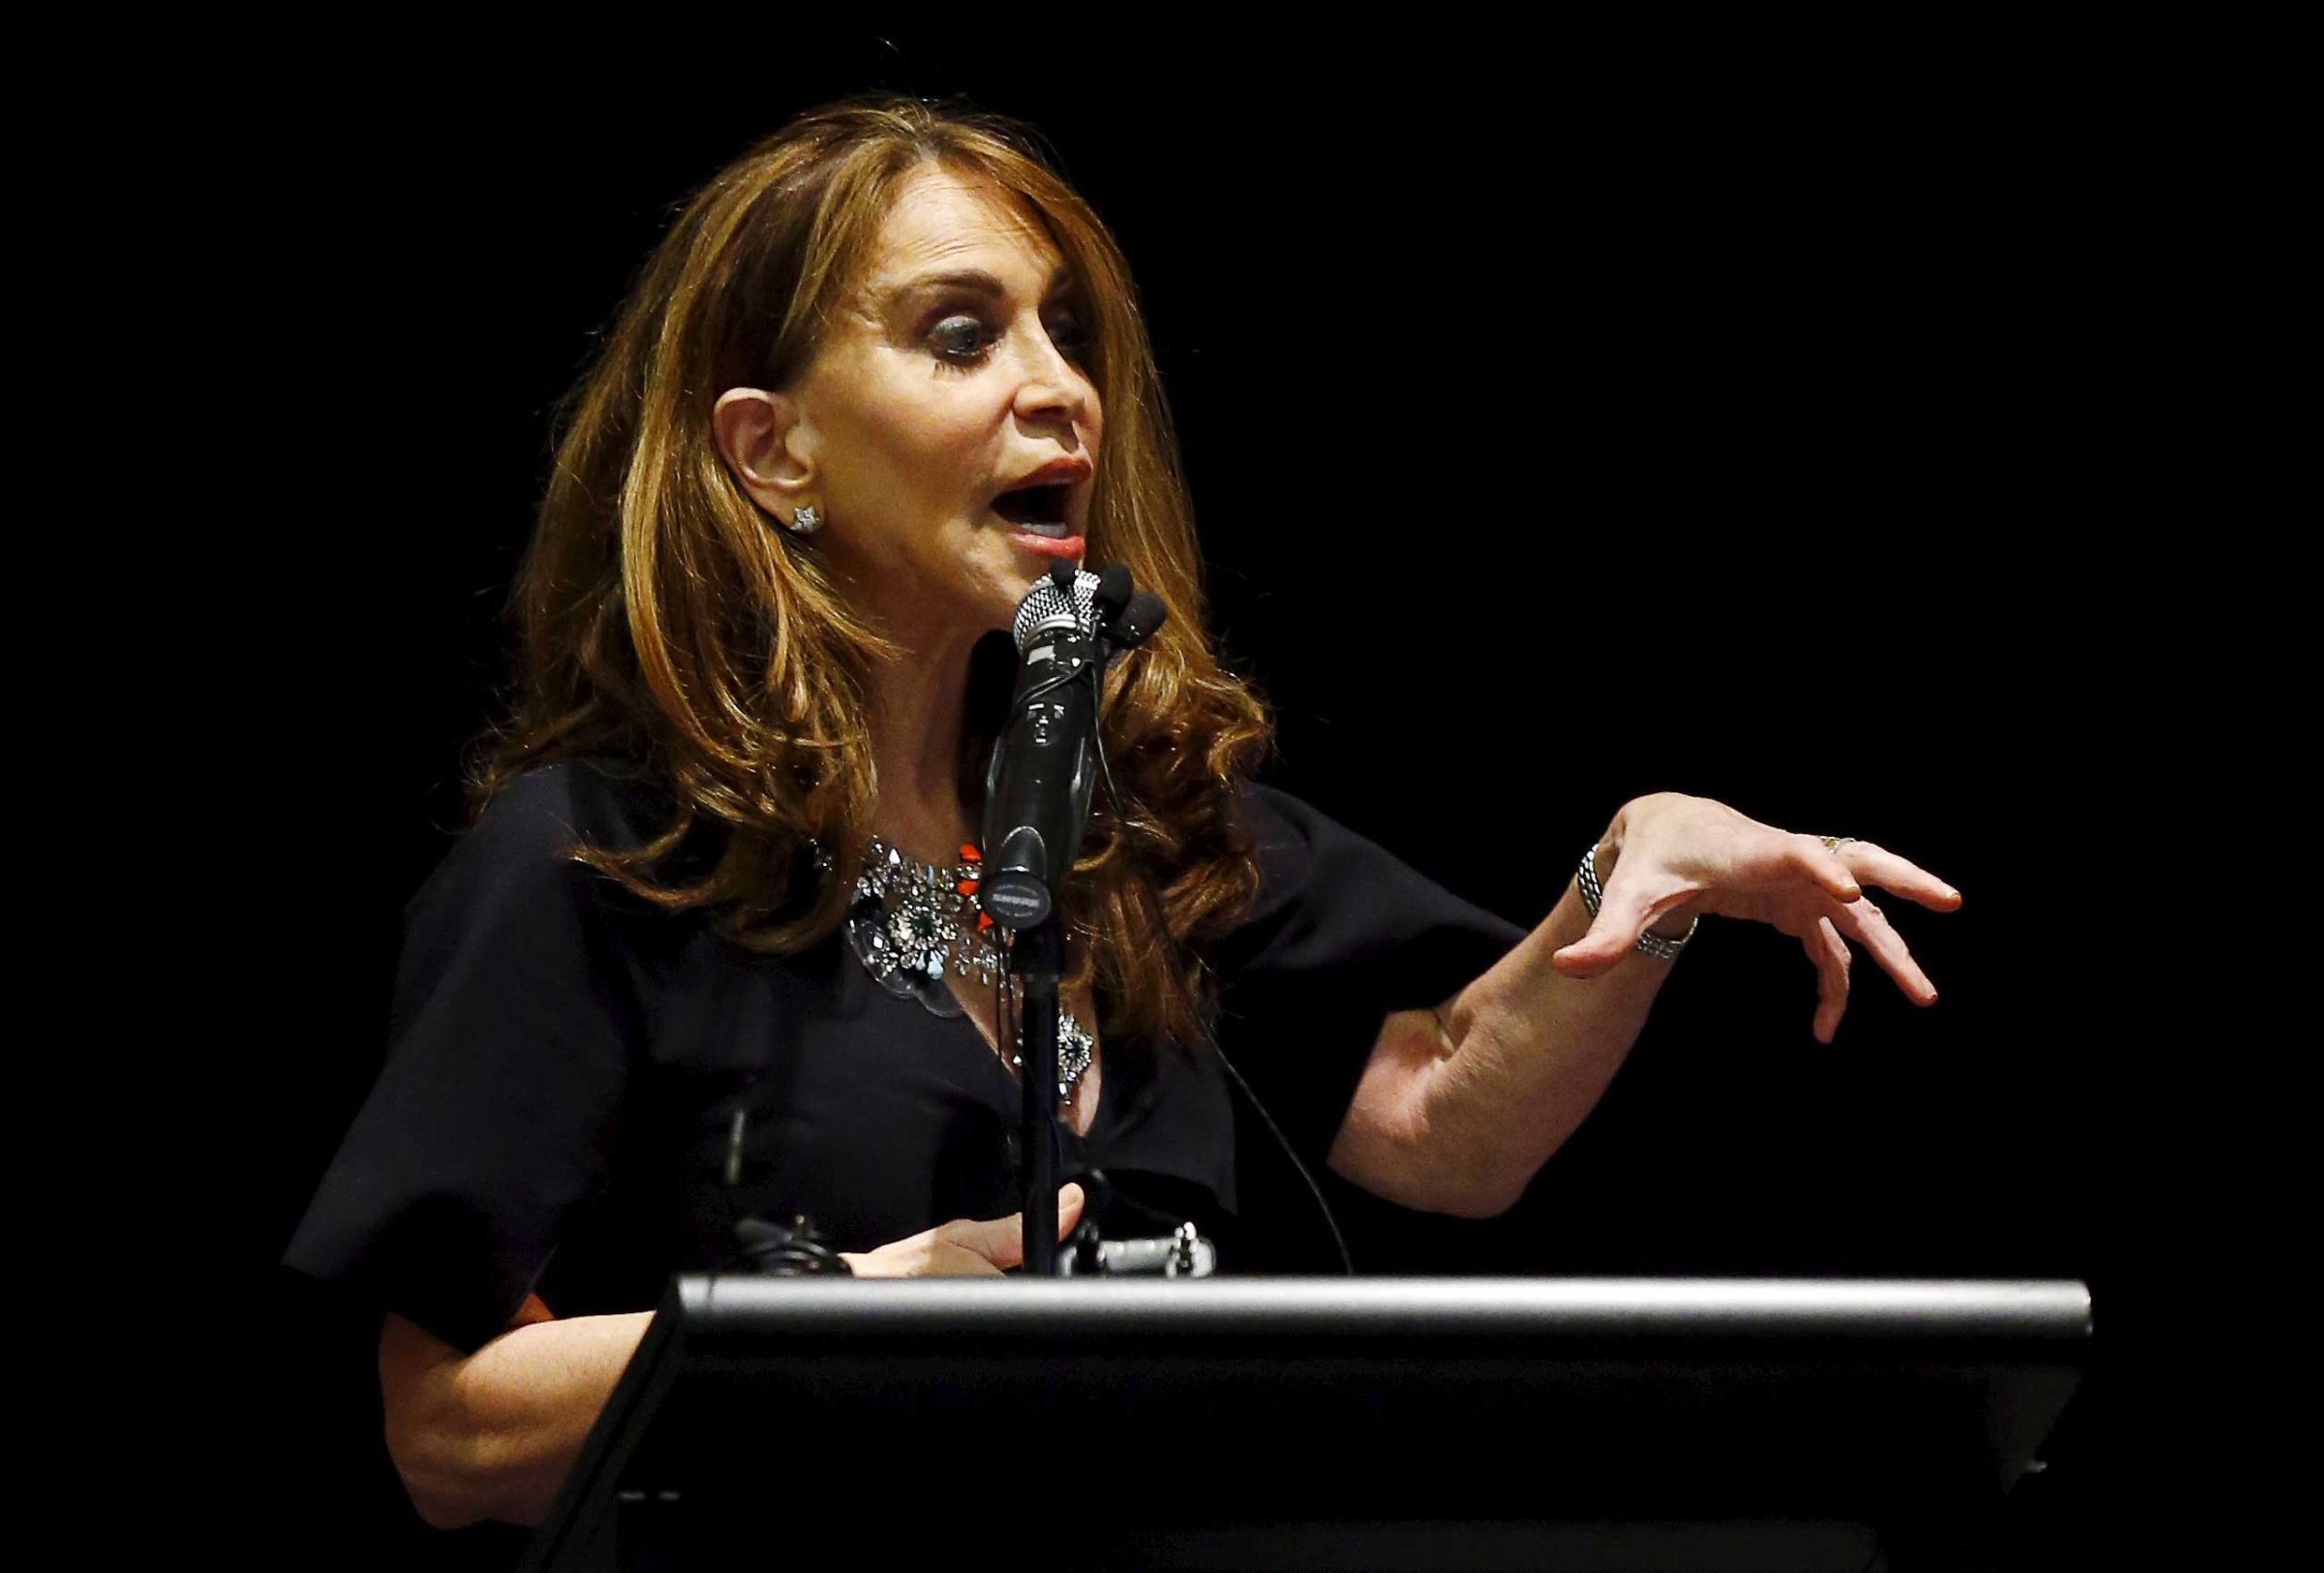 Political blogger Pamela Geller, American Freedom Defense Initiative's Houston-based founder, speaks at the Muhammad Art Exhibit and Contest, which is sponsored by the American Freedom Defense Initiative, in Garland, Texas May 3, 2015.